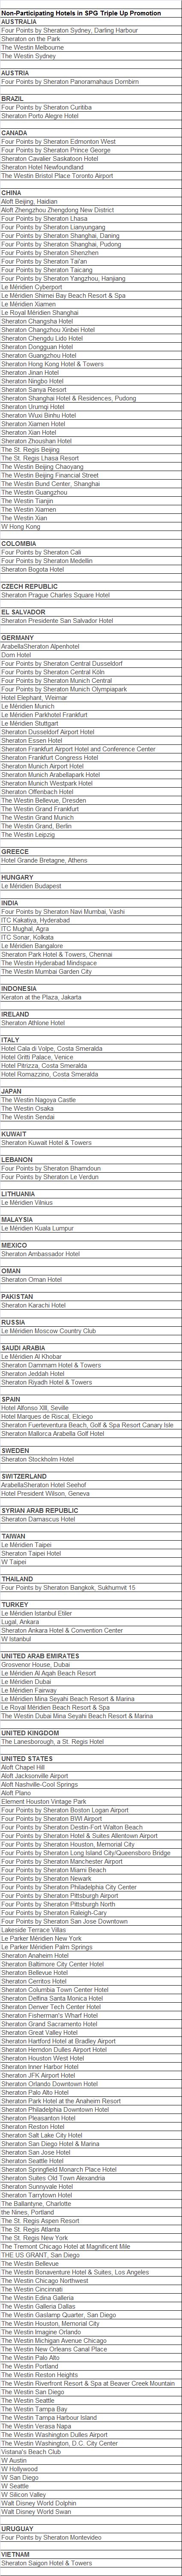 a list of hotels and resorts